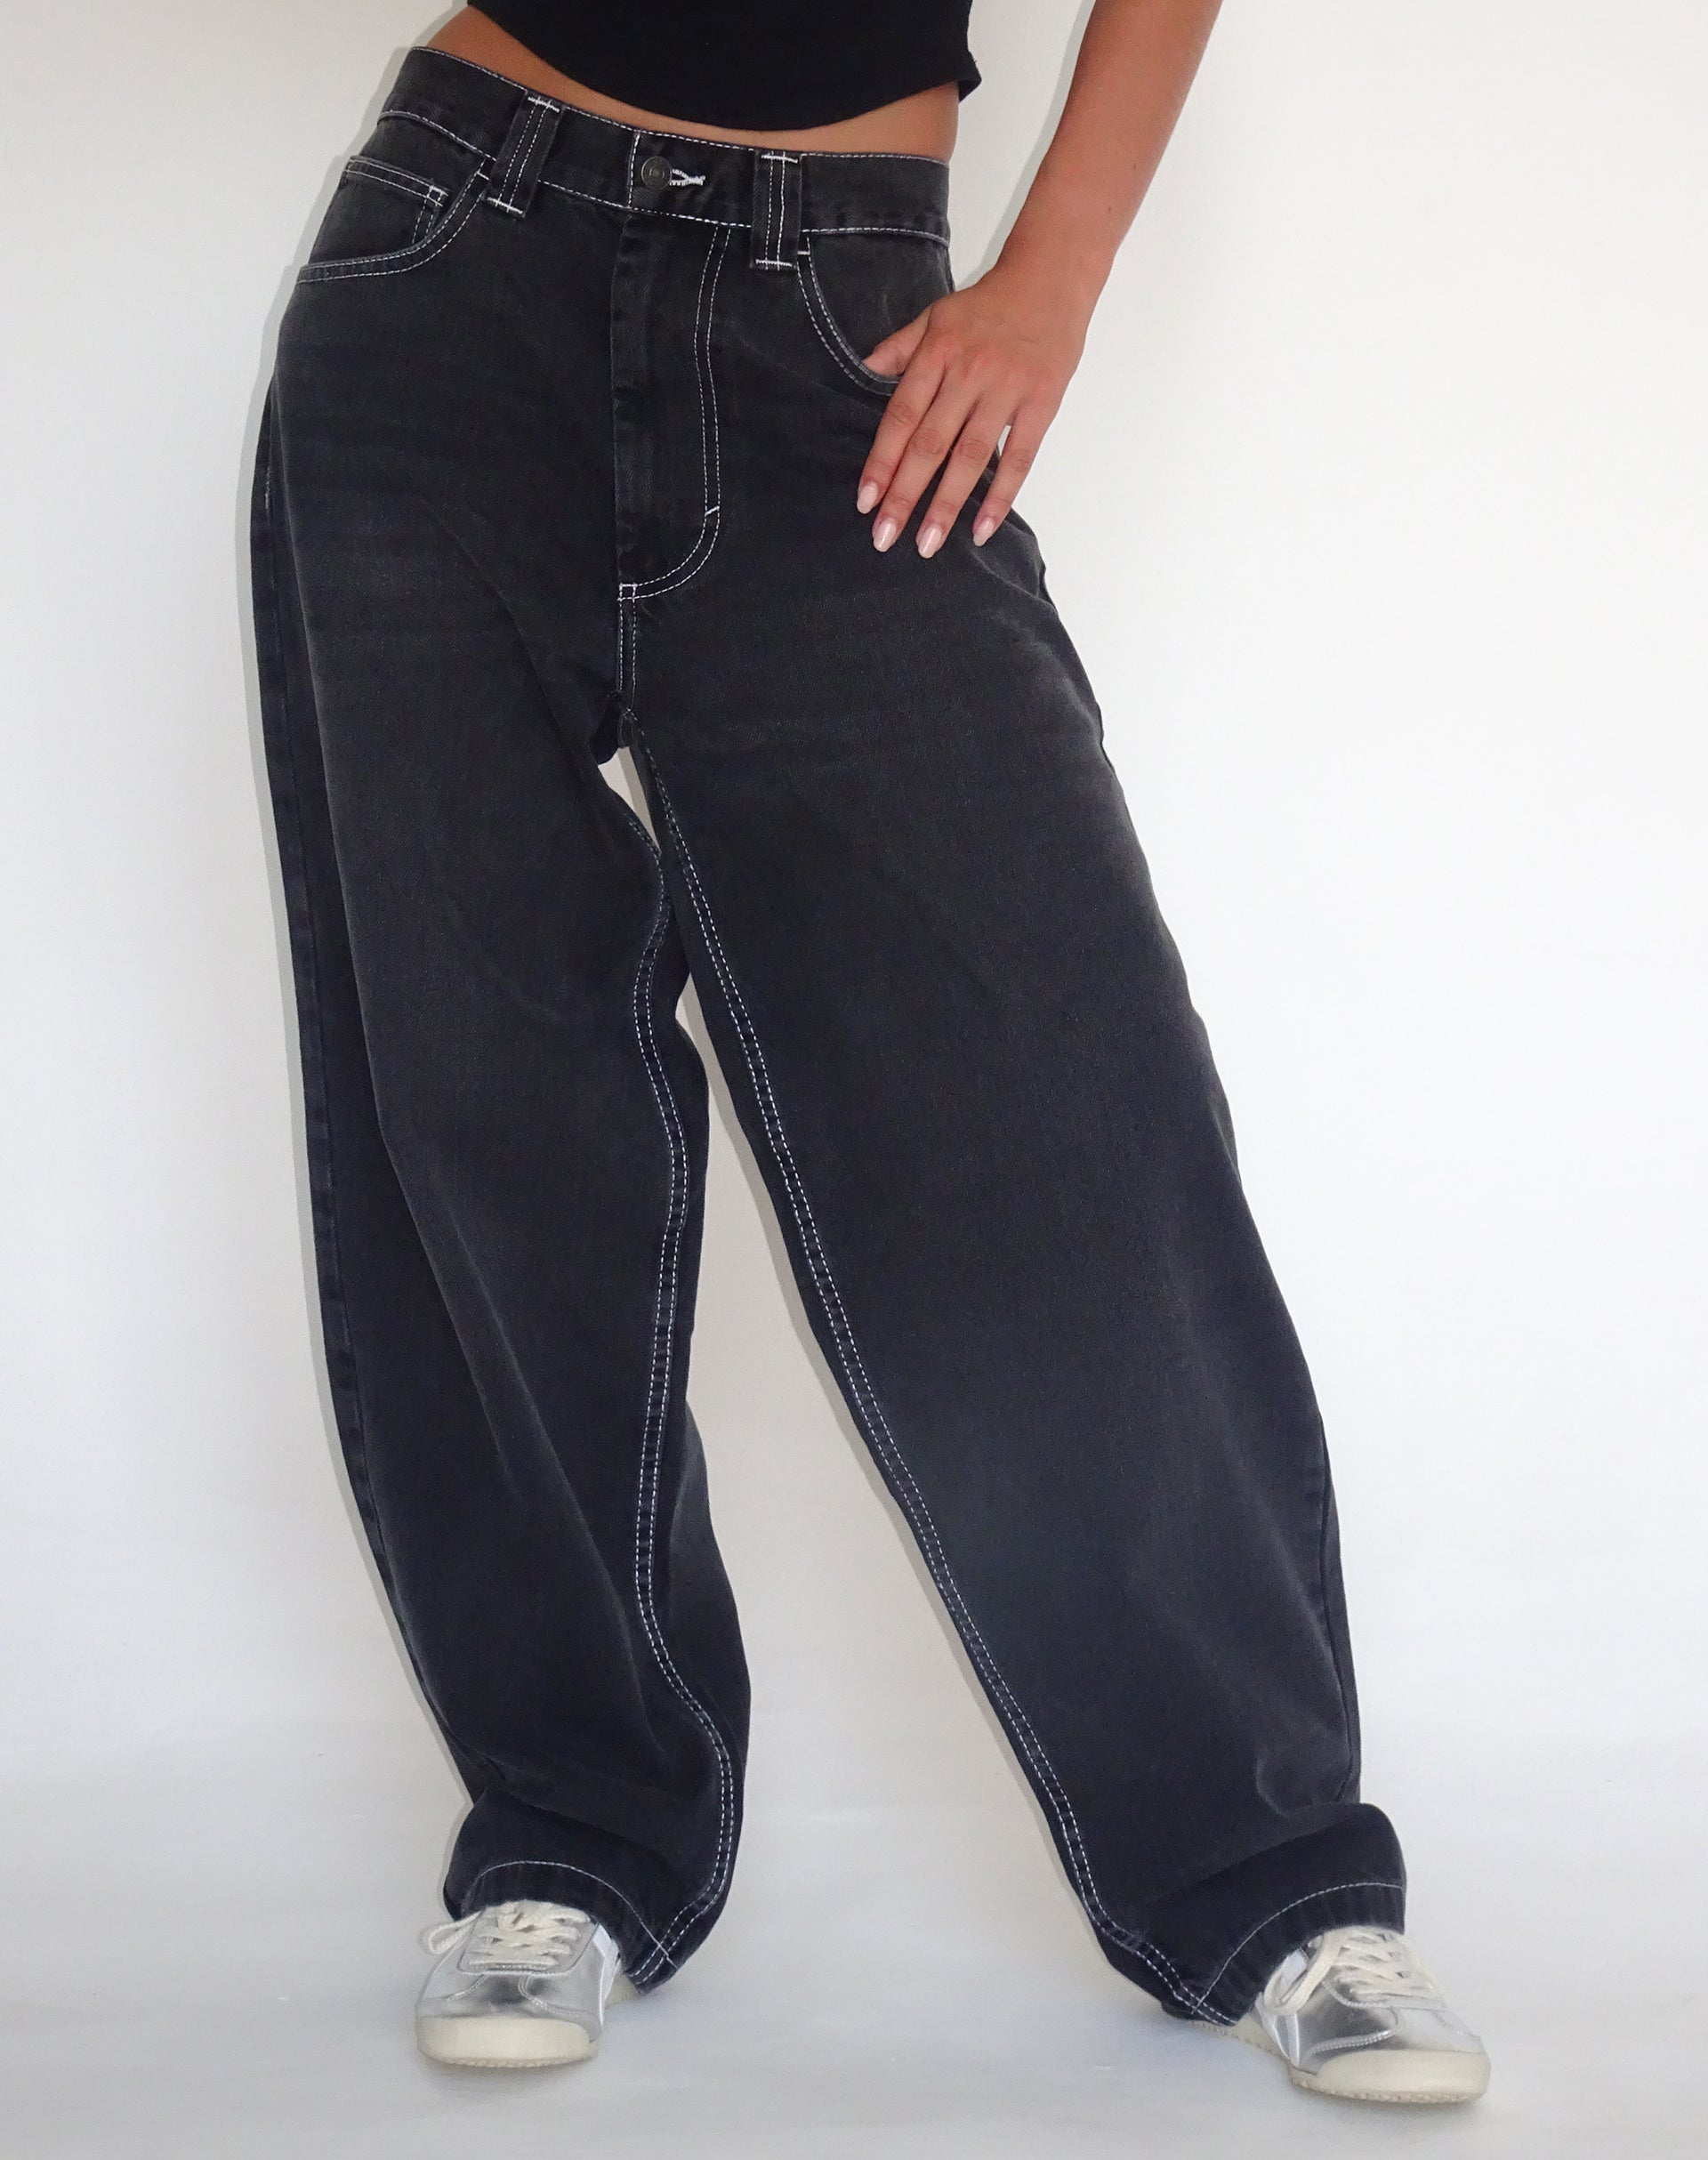 Image of Skater Low Rise Jean in Vintage Black with White Top Stitch